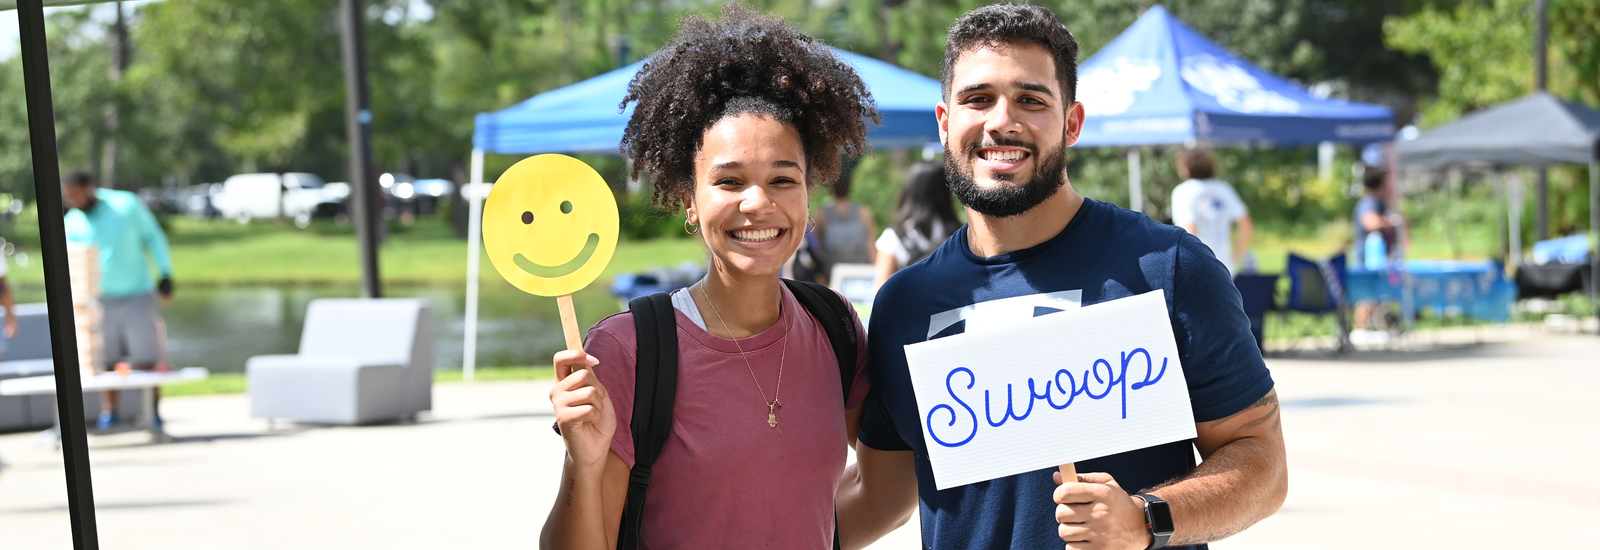 Male and female student outside in the student union courtyard holding up photo-booth signs and smiling